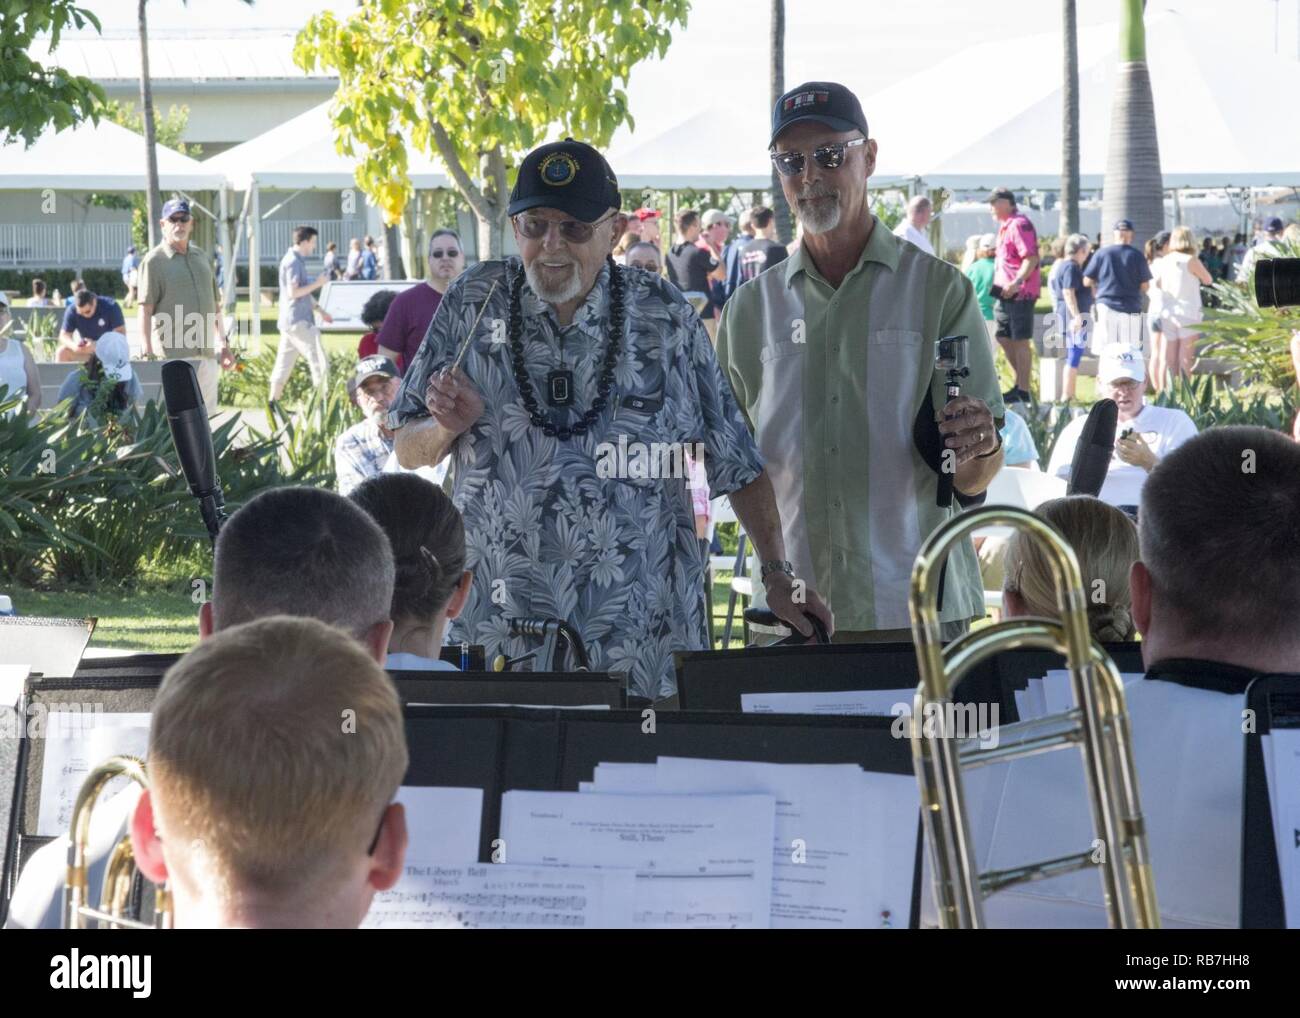 PEARL HARBOR (Dec. 5, 2016) Pearl Harbor survivor and honorary bandmaster Ira John Schab conducts the Pacific Fleet Band during a public performance at the Pearl Harbor Visitor Center. The Pacific Fleet Band made Schab an honorary bandmaster during the concert, one of several performances during the 75th Pearl Harbor Commemoration week. Dec. 7, 2016, marks the 75th anniversary on the attack of Pearl Harbor and Oahu.  As a Pacific nation, the U.S. is committed to continue its responsibility of protecting the Pacific sea-lanes, advancing international ideals and relationships, well as delivering Stock Photo